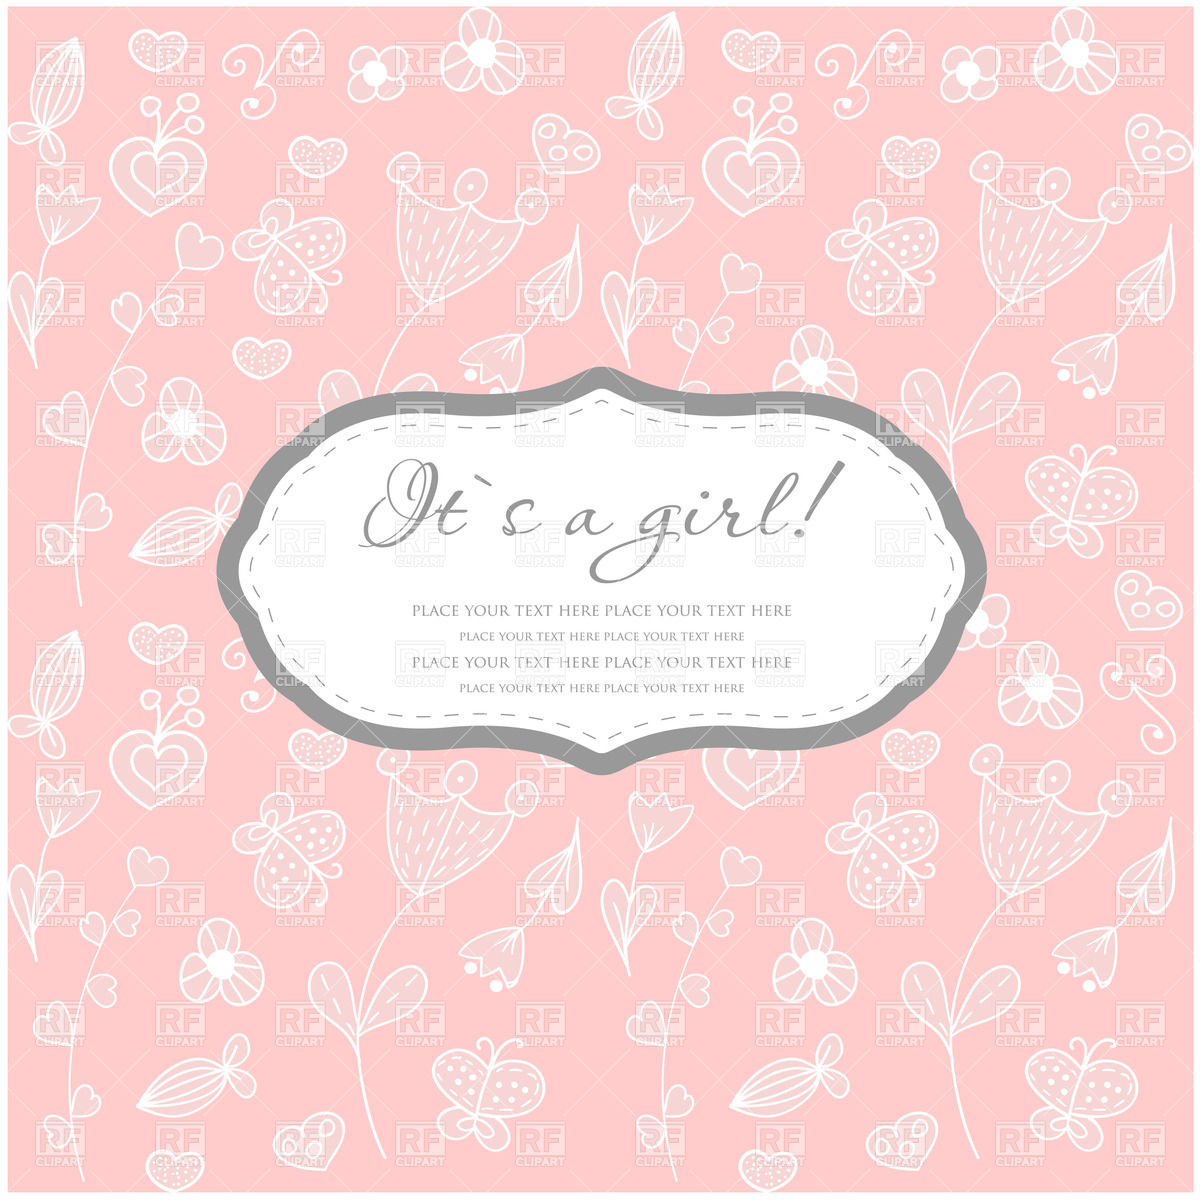 Greeting Card With Card On Pink Floral Background 21357 Borders And